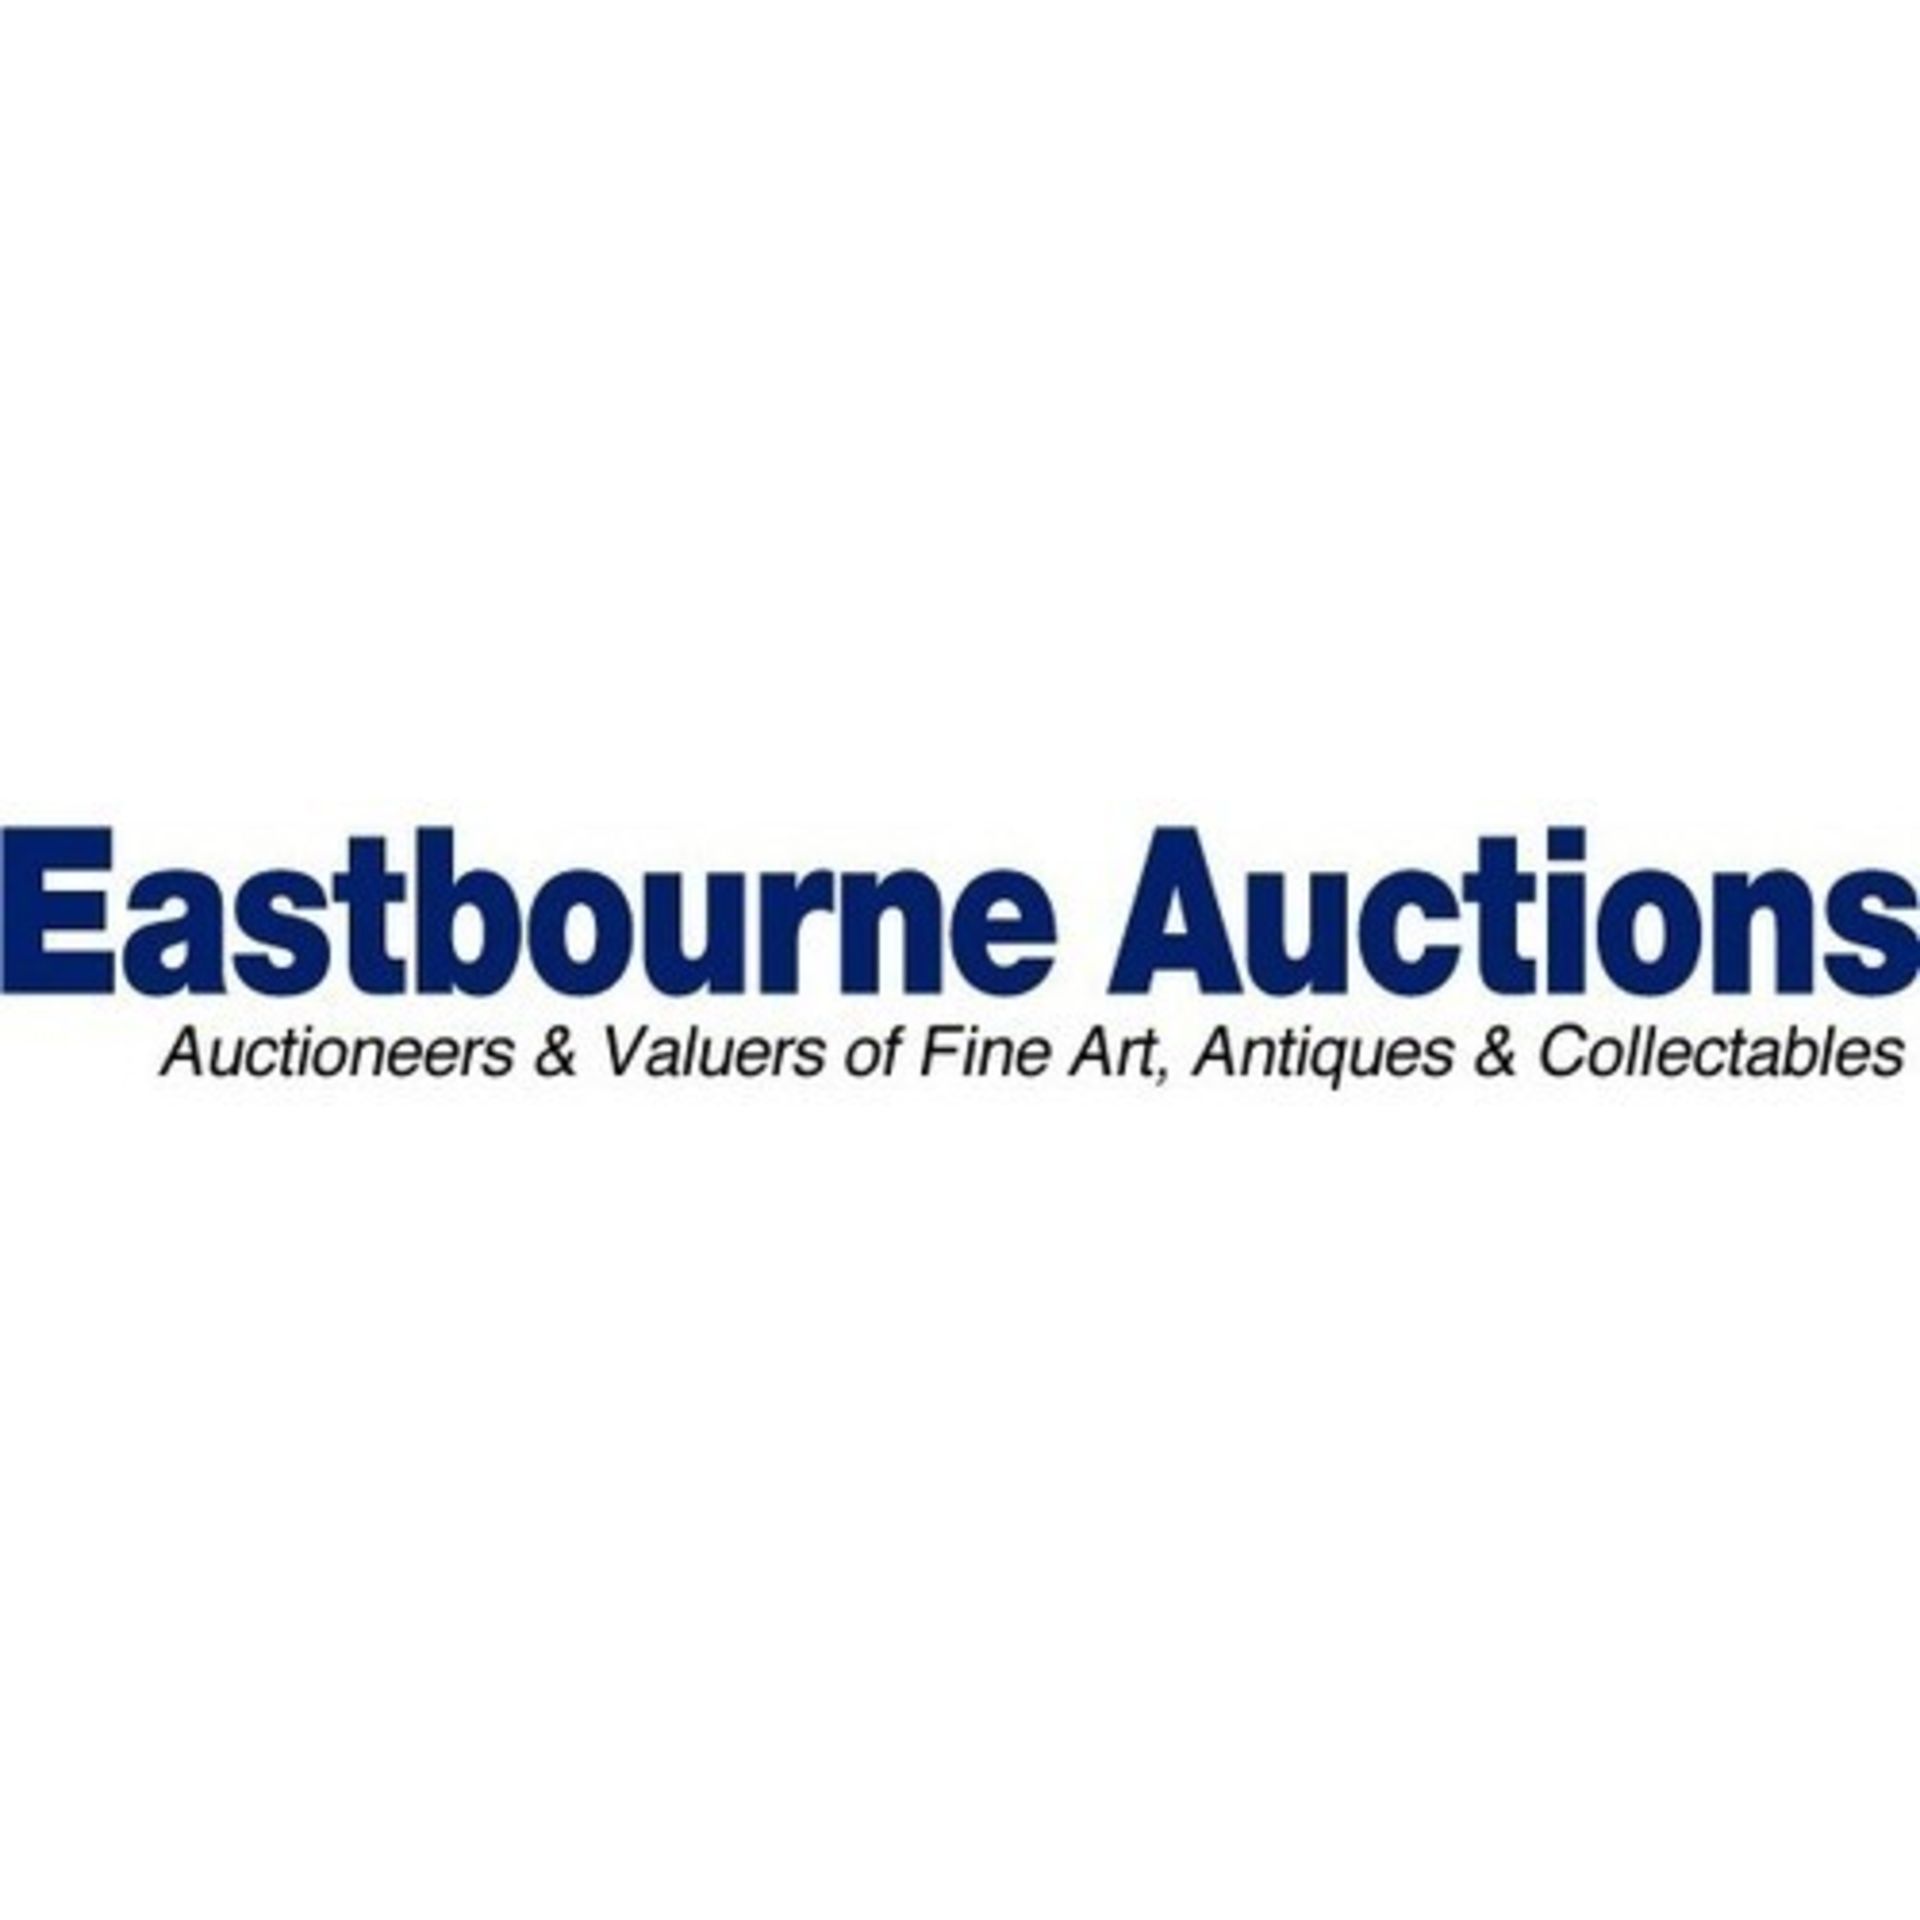 NO LOT For further information on this lot please contact the auctioneer